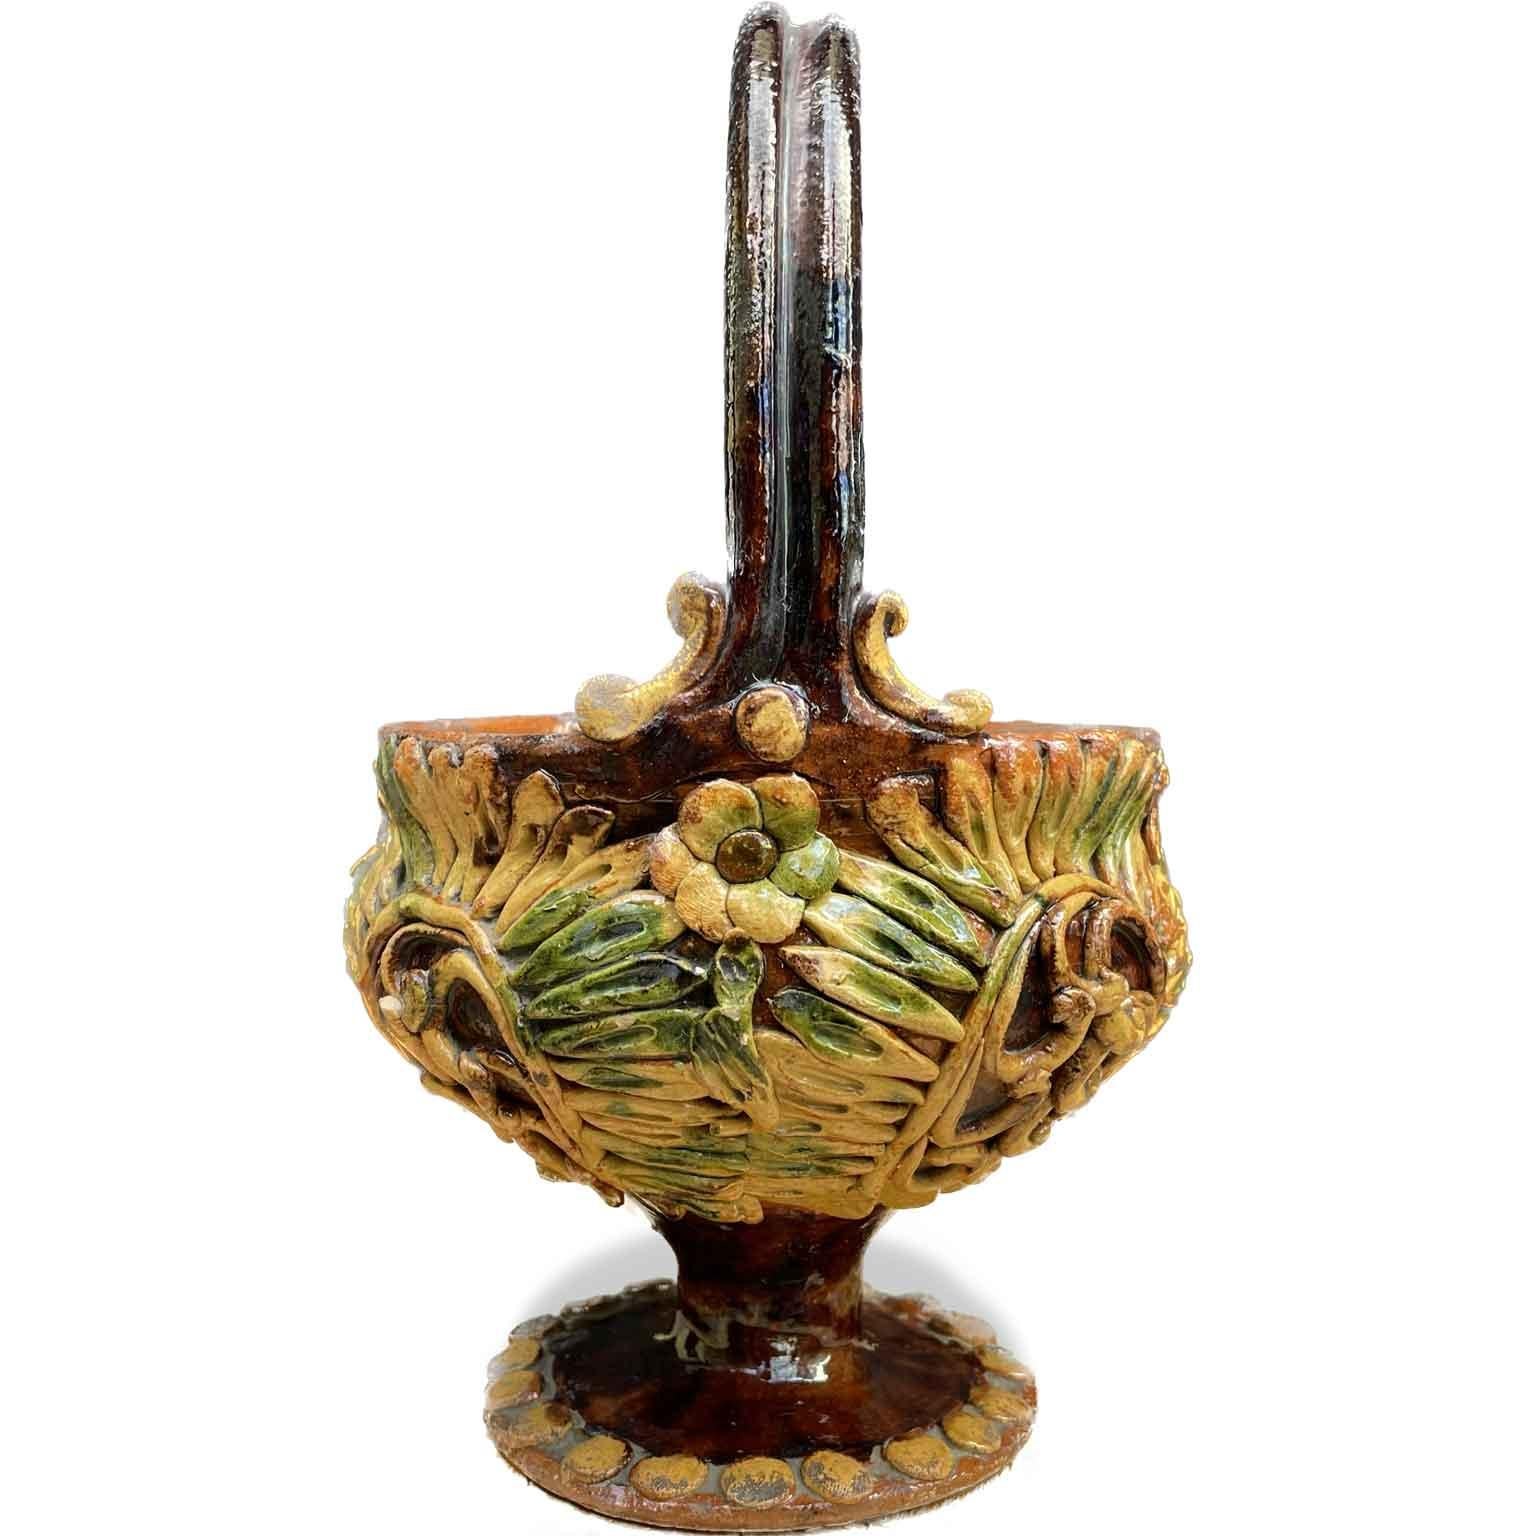 From Tuscany a ceramic basket realized with a circular vase with polychrome geometric decorations on the body and a relief decoration handmade by applied flowers and scrolls as well as on the handle.
A Mid-19th Century Italian ceramic warmer, a